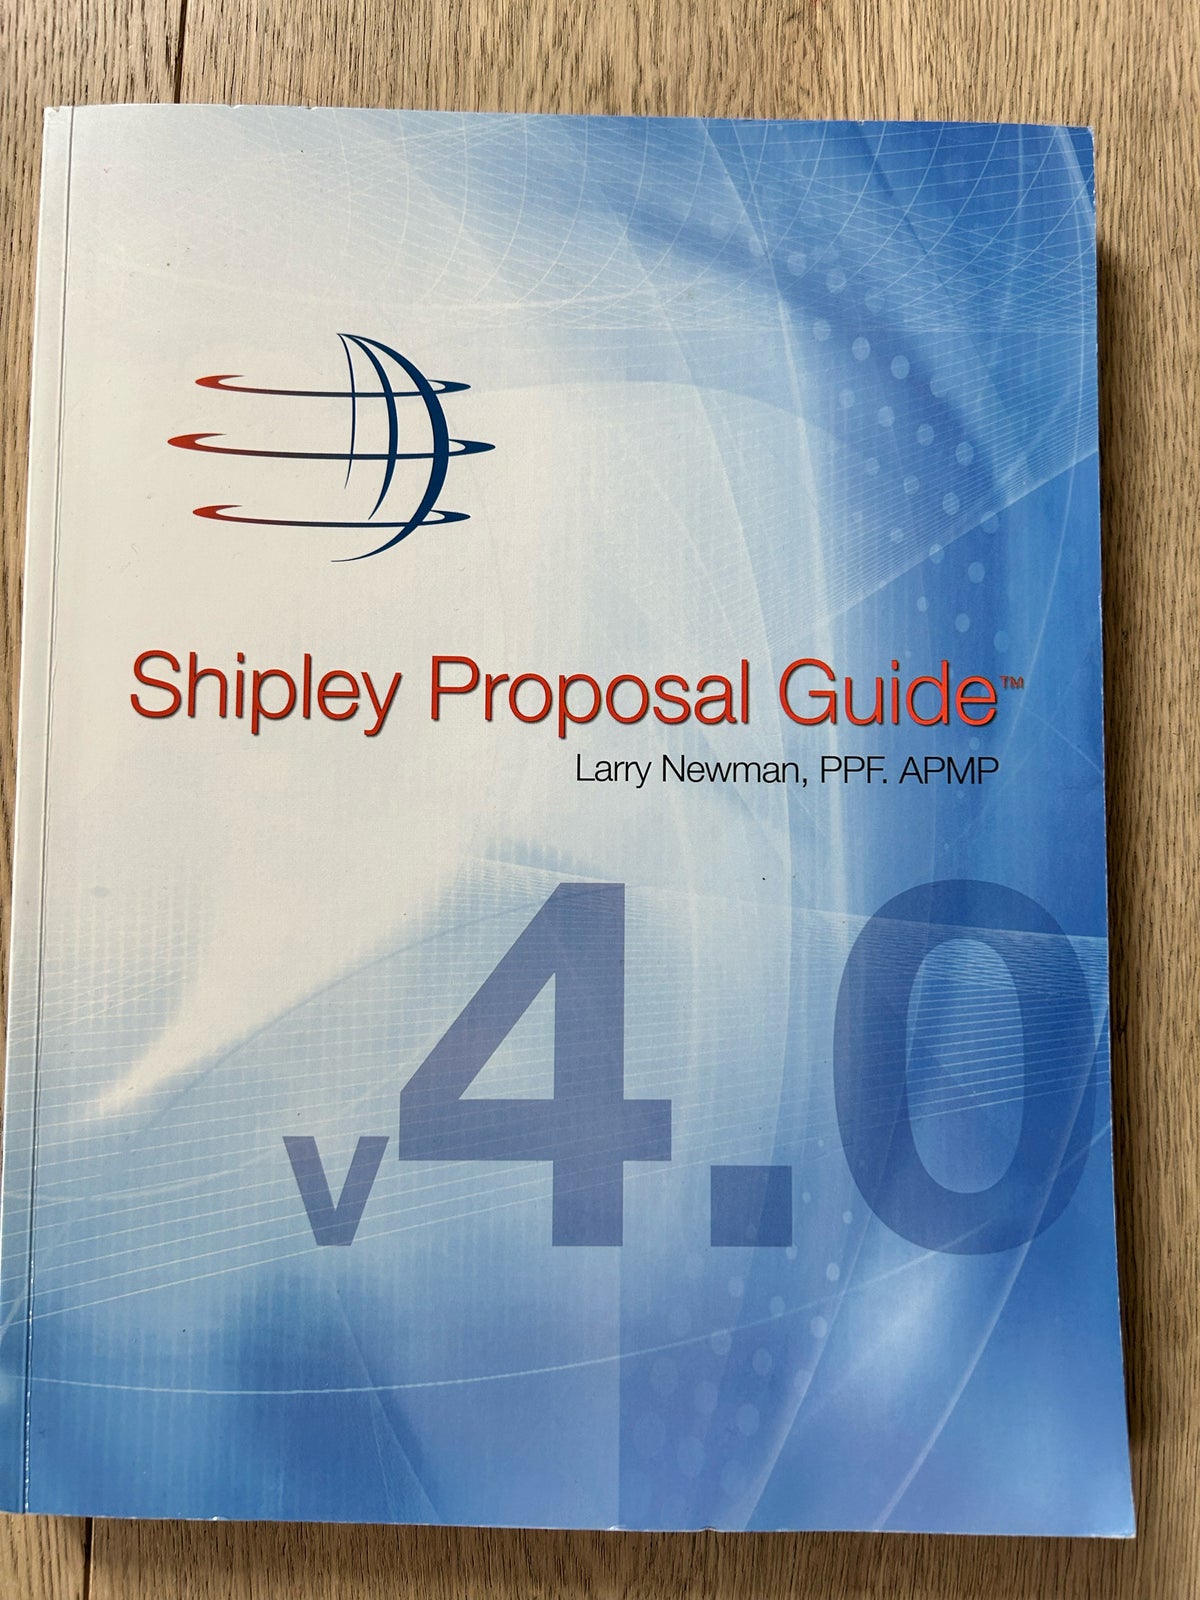 Shipley Proposal Guide, Larry Newman, v4.0 udgave